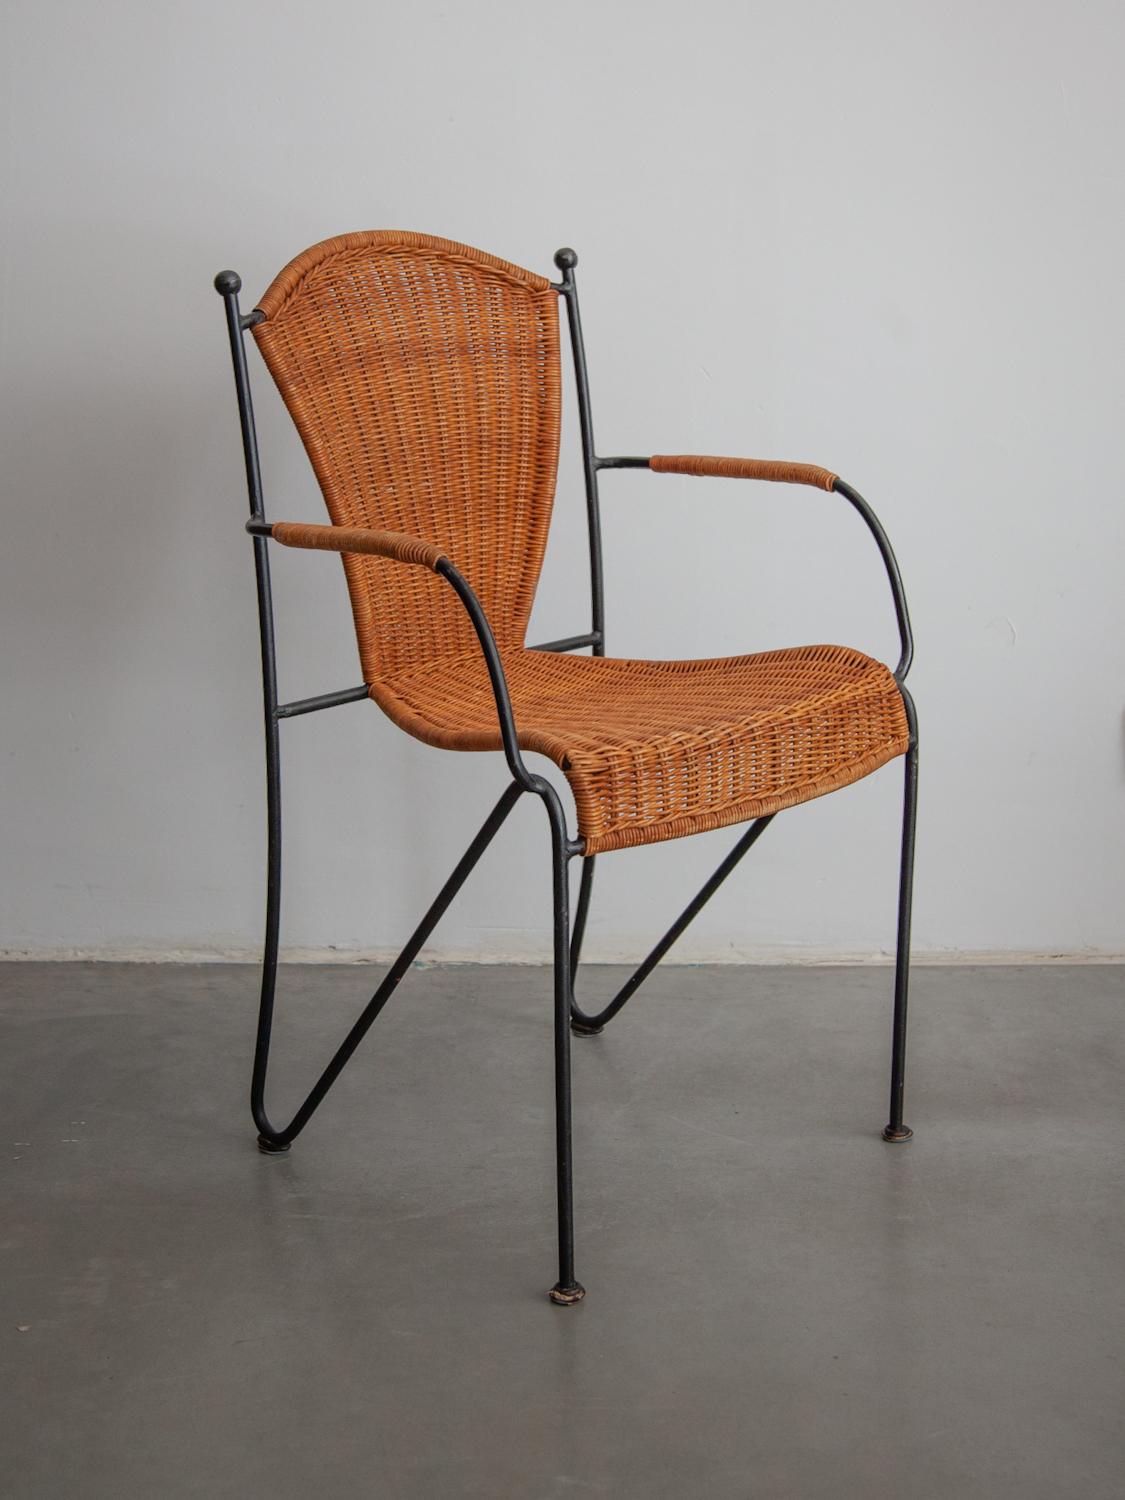 Vintage set indoor, outdoor dining chairs by designer Pipsan Saarinen Swanson for Ficks Reed.Sculptural black iron frames with gold ball ends. Woven rattan seats. Set of 10 chairs, two which have arm rests. 

Dimensions:No armrests: 44W x 85H x 44D